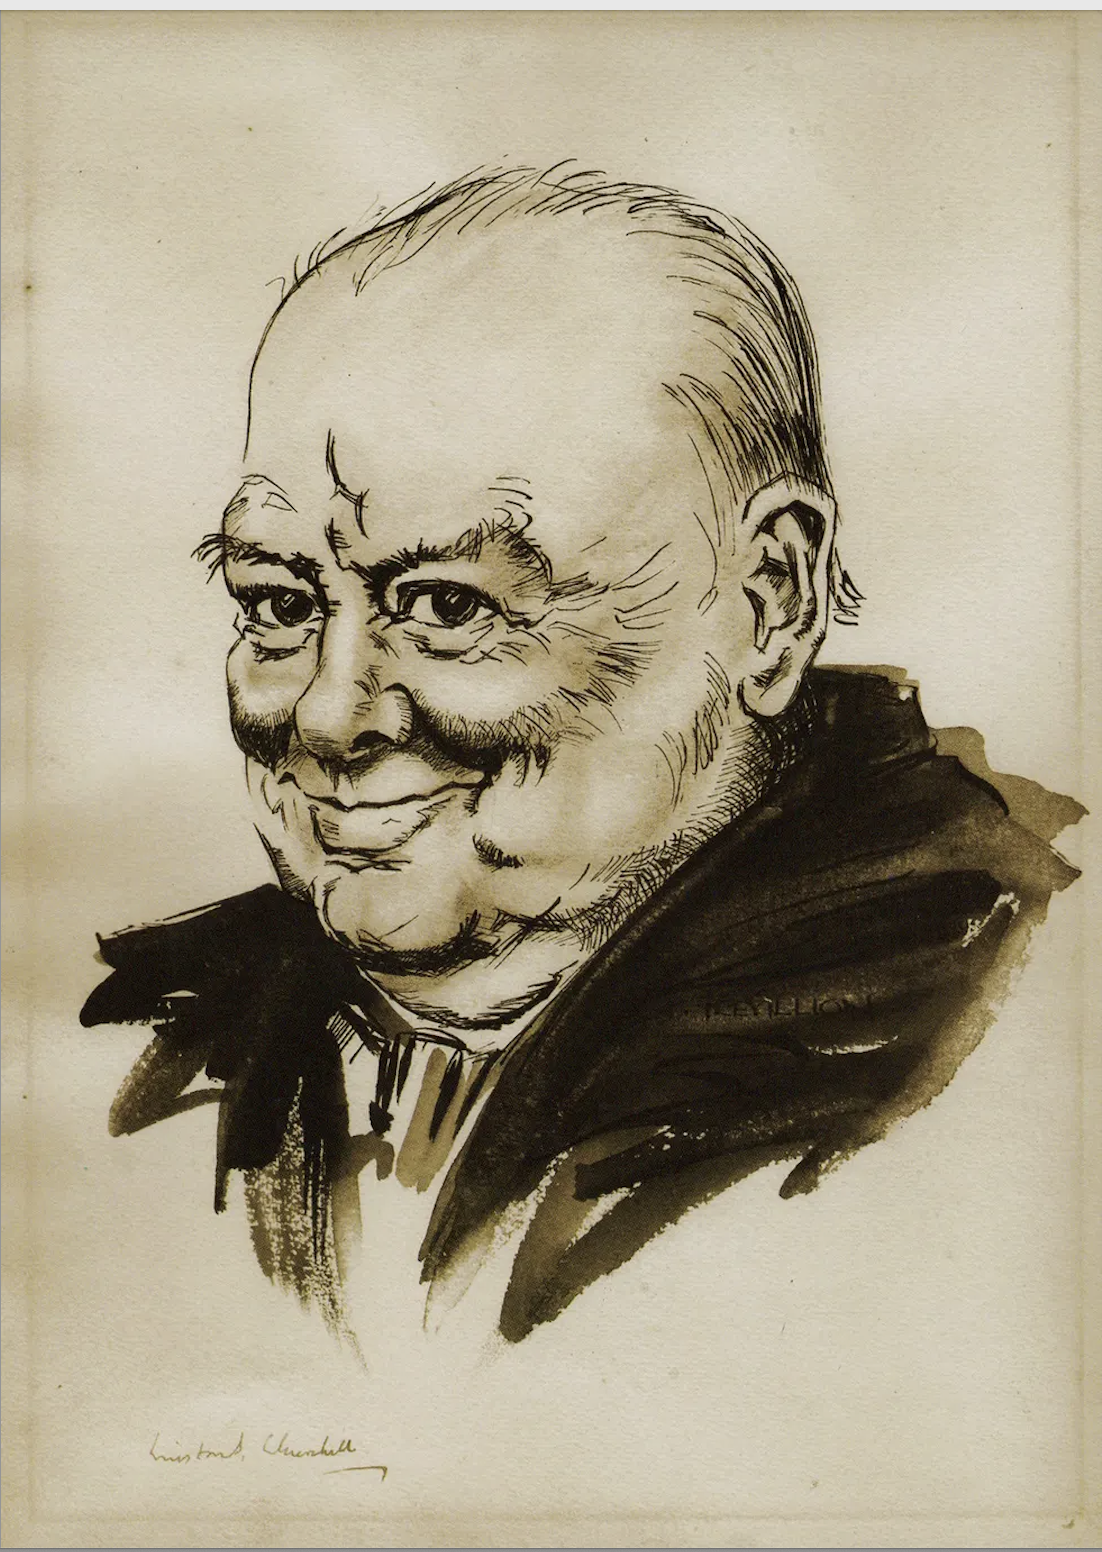 Pen and ink drawing of Sir Winston Churchill by Paul Trevillion.